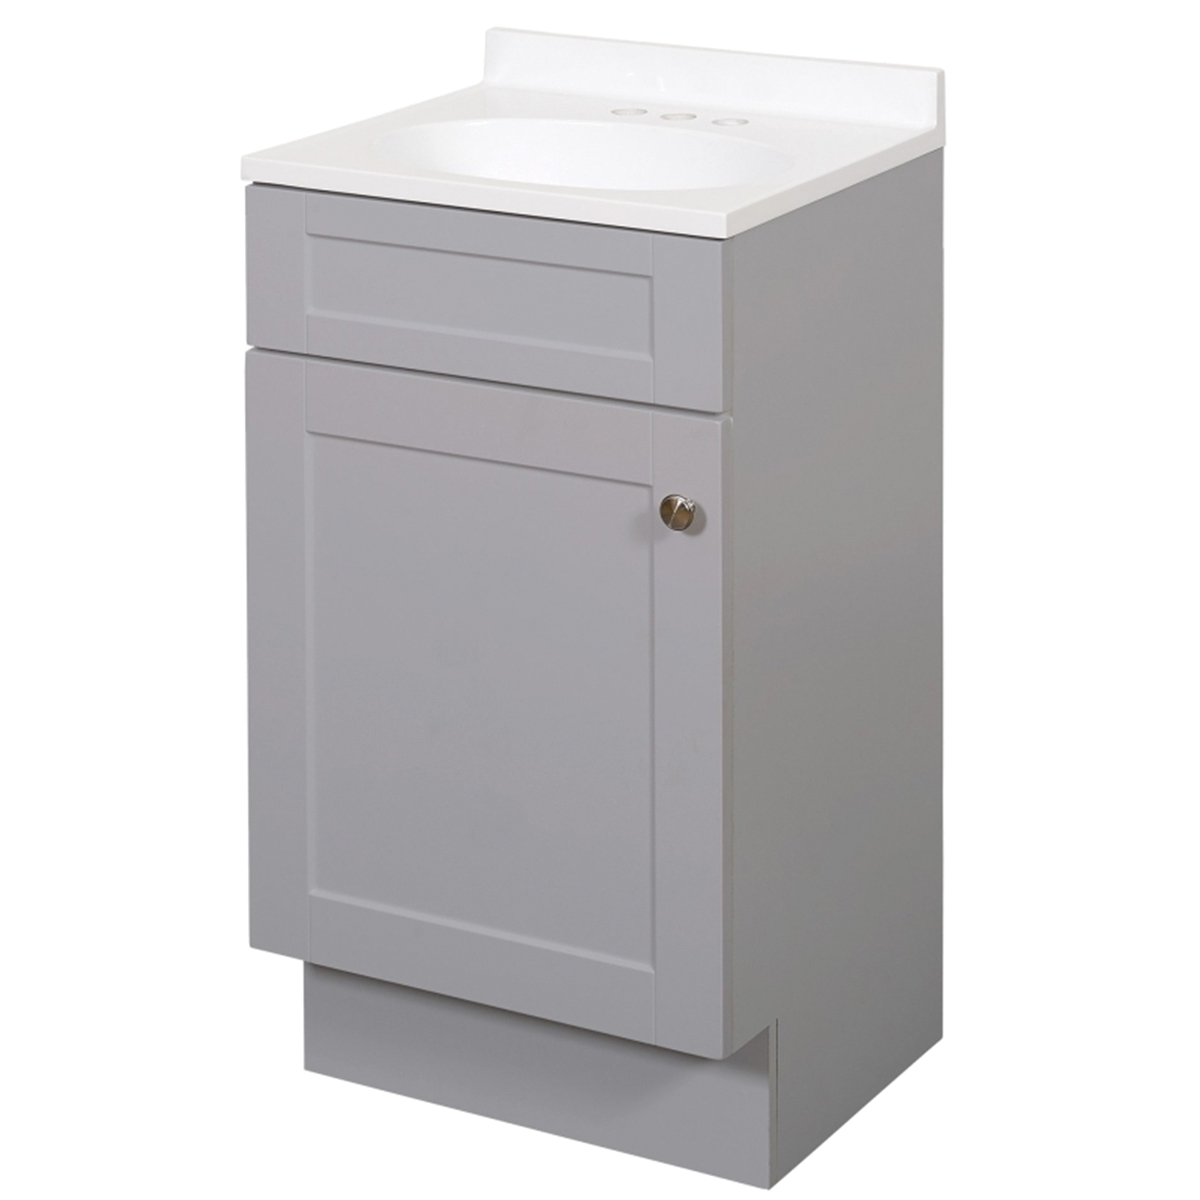 SBC18GY 1-Door Shaker Vanity with Top, Wood, Cool Gray, Cultured Marble Sink, White Sink